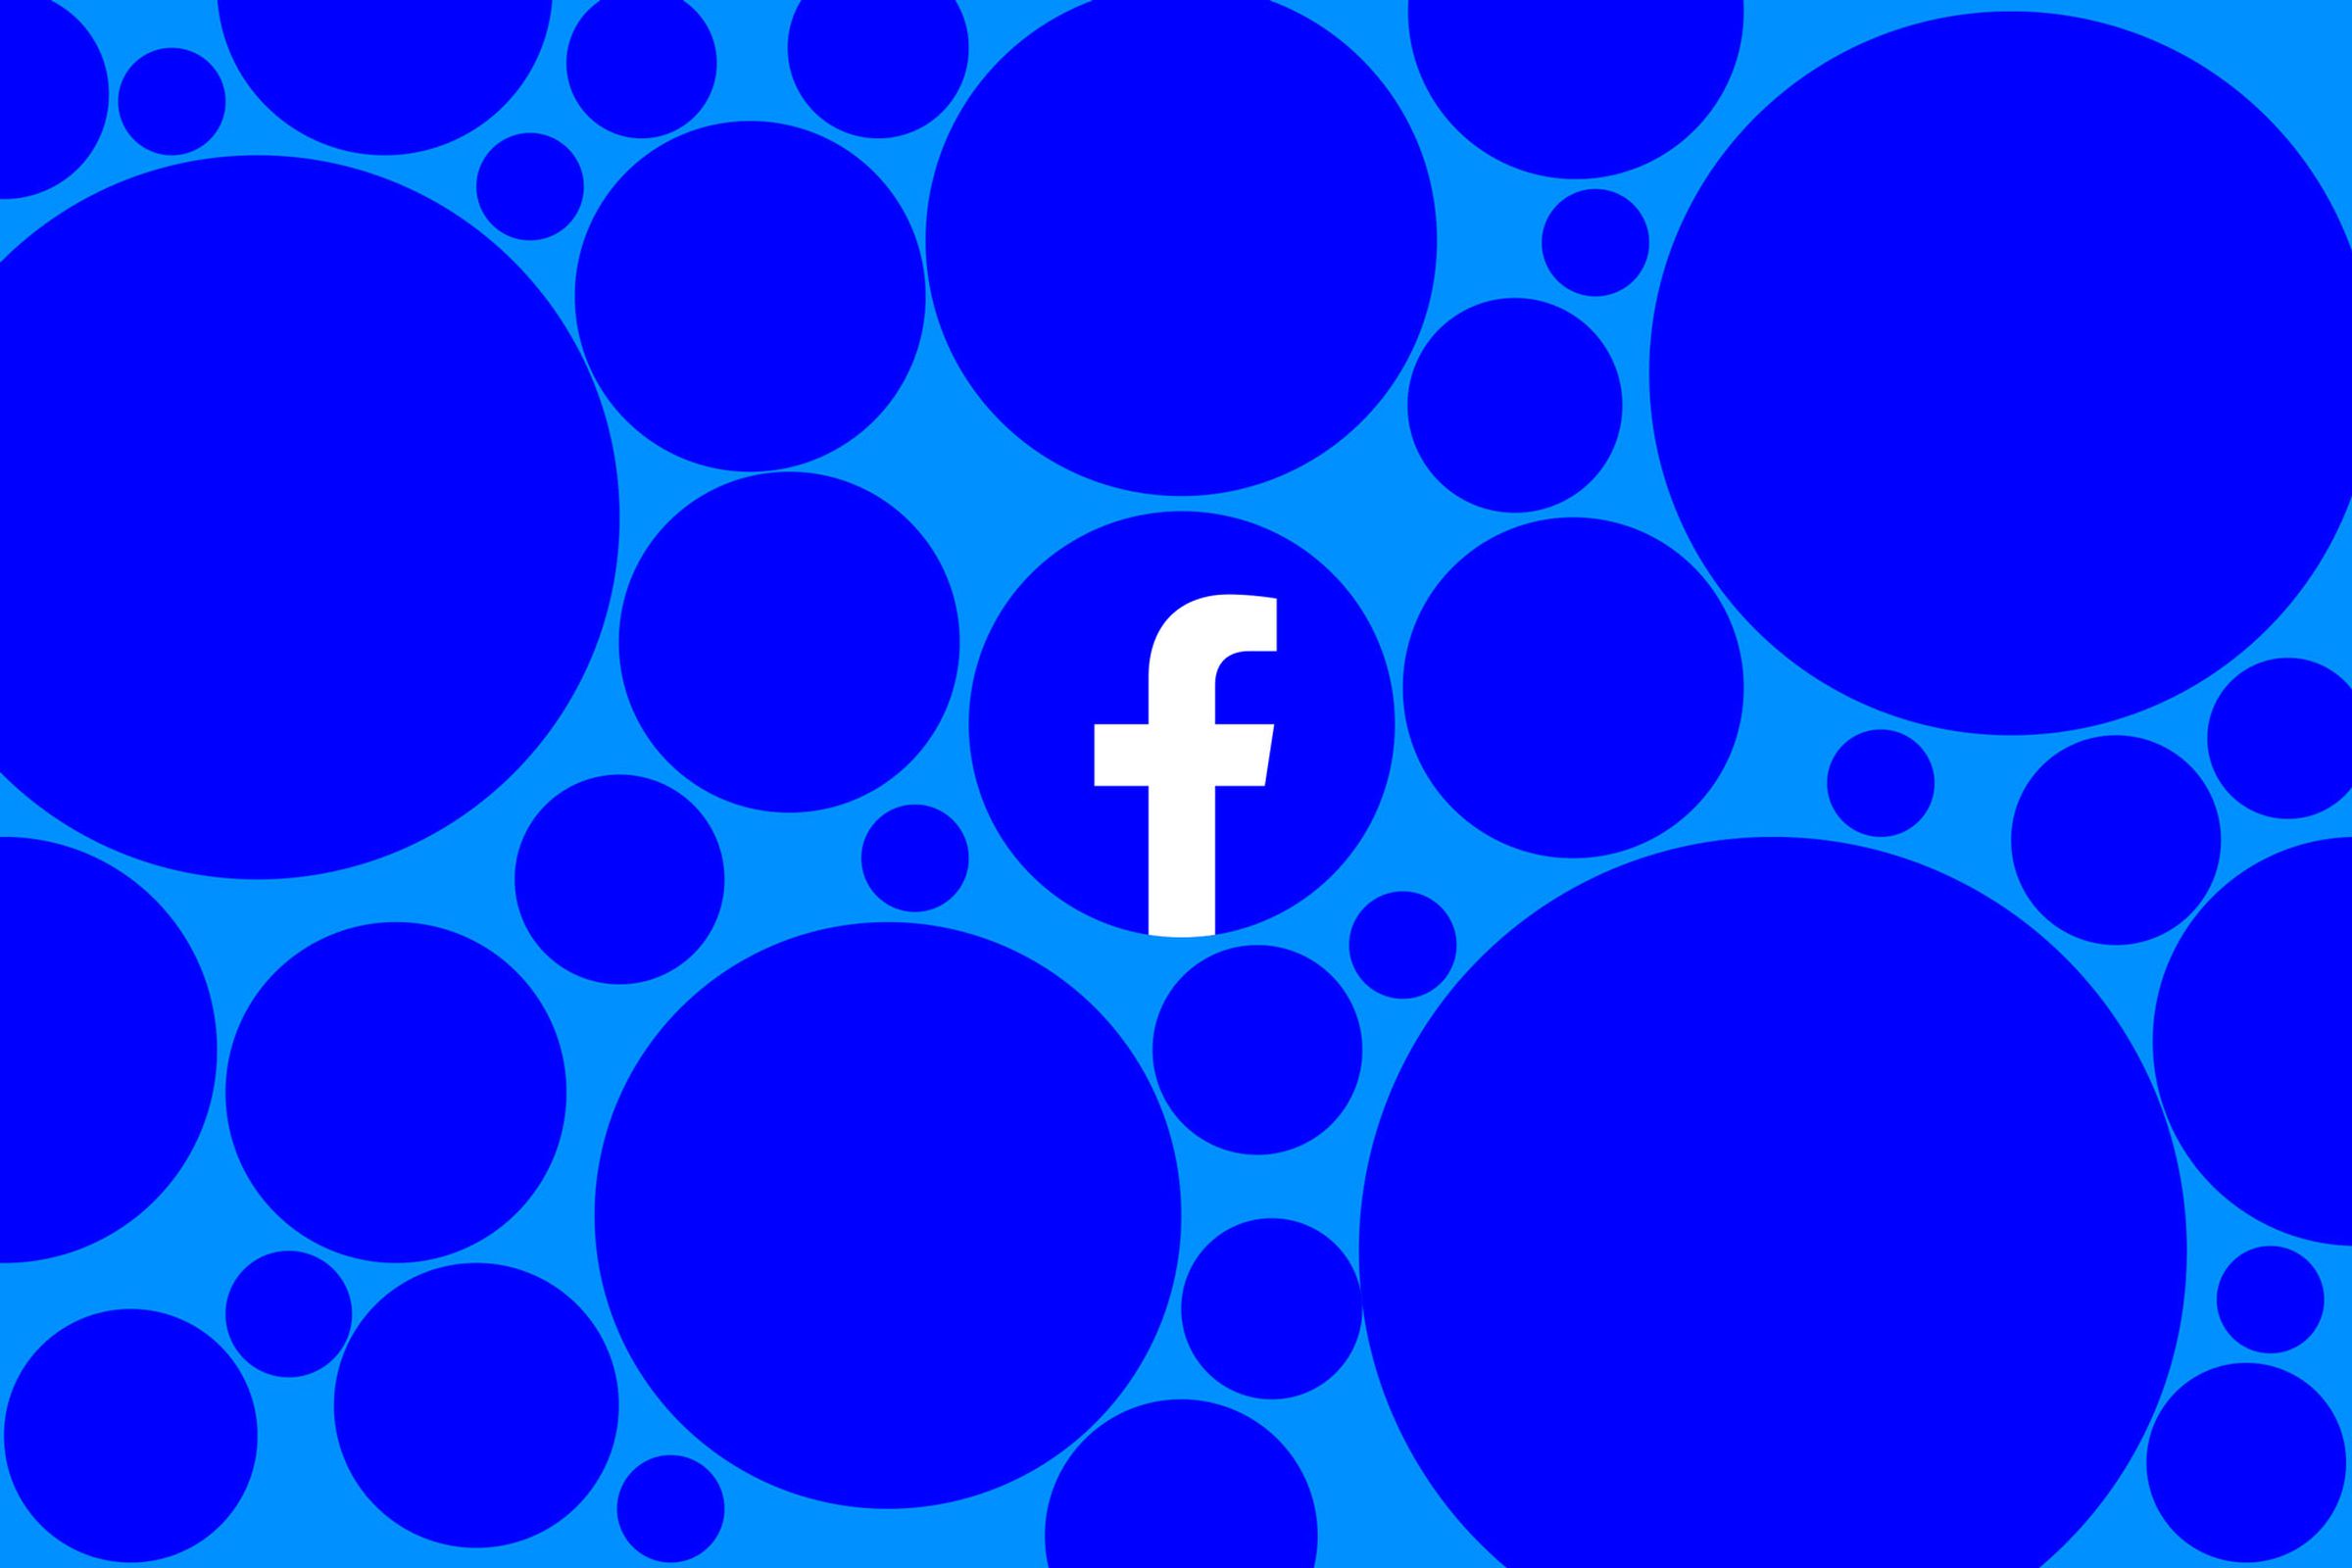 The Facebook logo on a blue background, surrounded by dark blue circles of various sizes